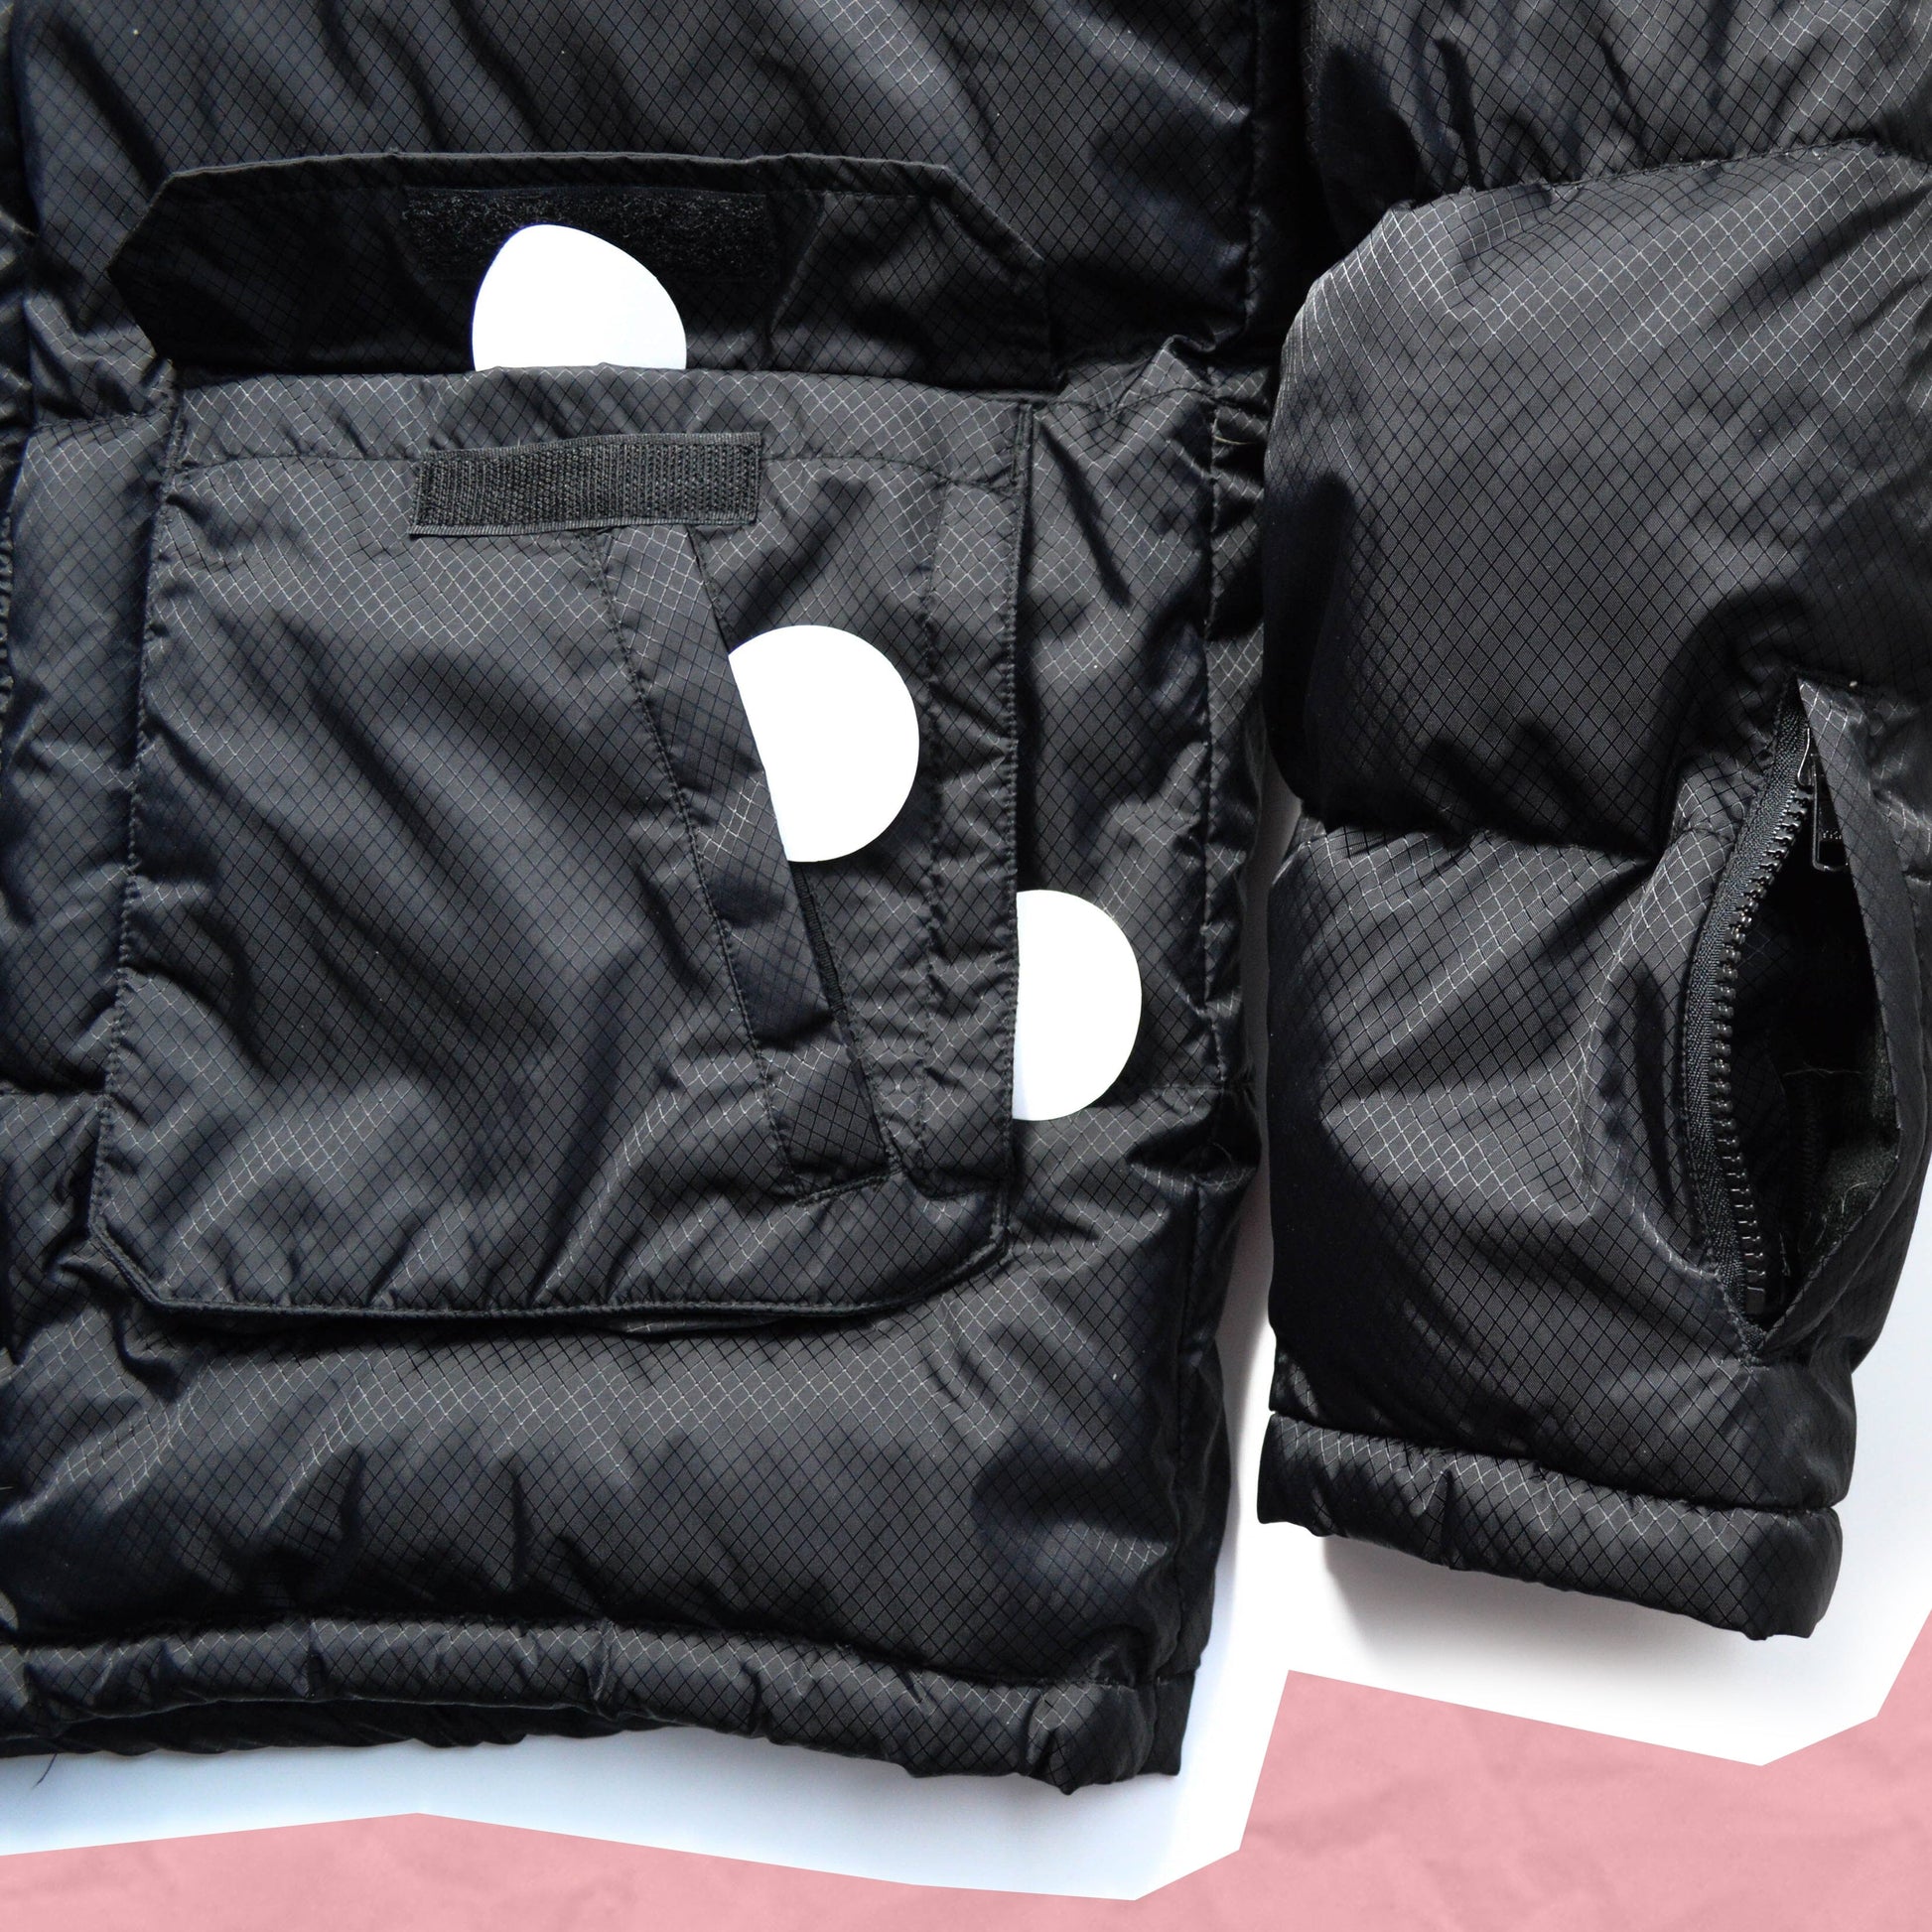 Stussy Black Ripstop Multi-compartment Tactical Puffer Jacket ( M & L )